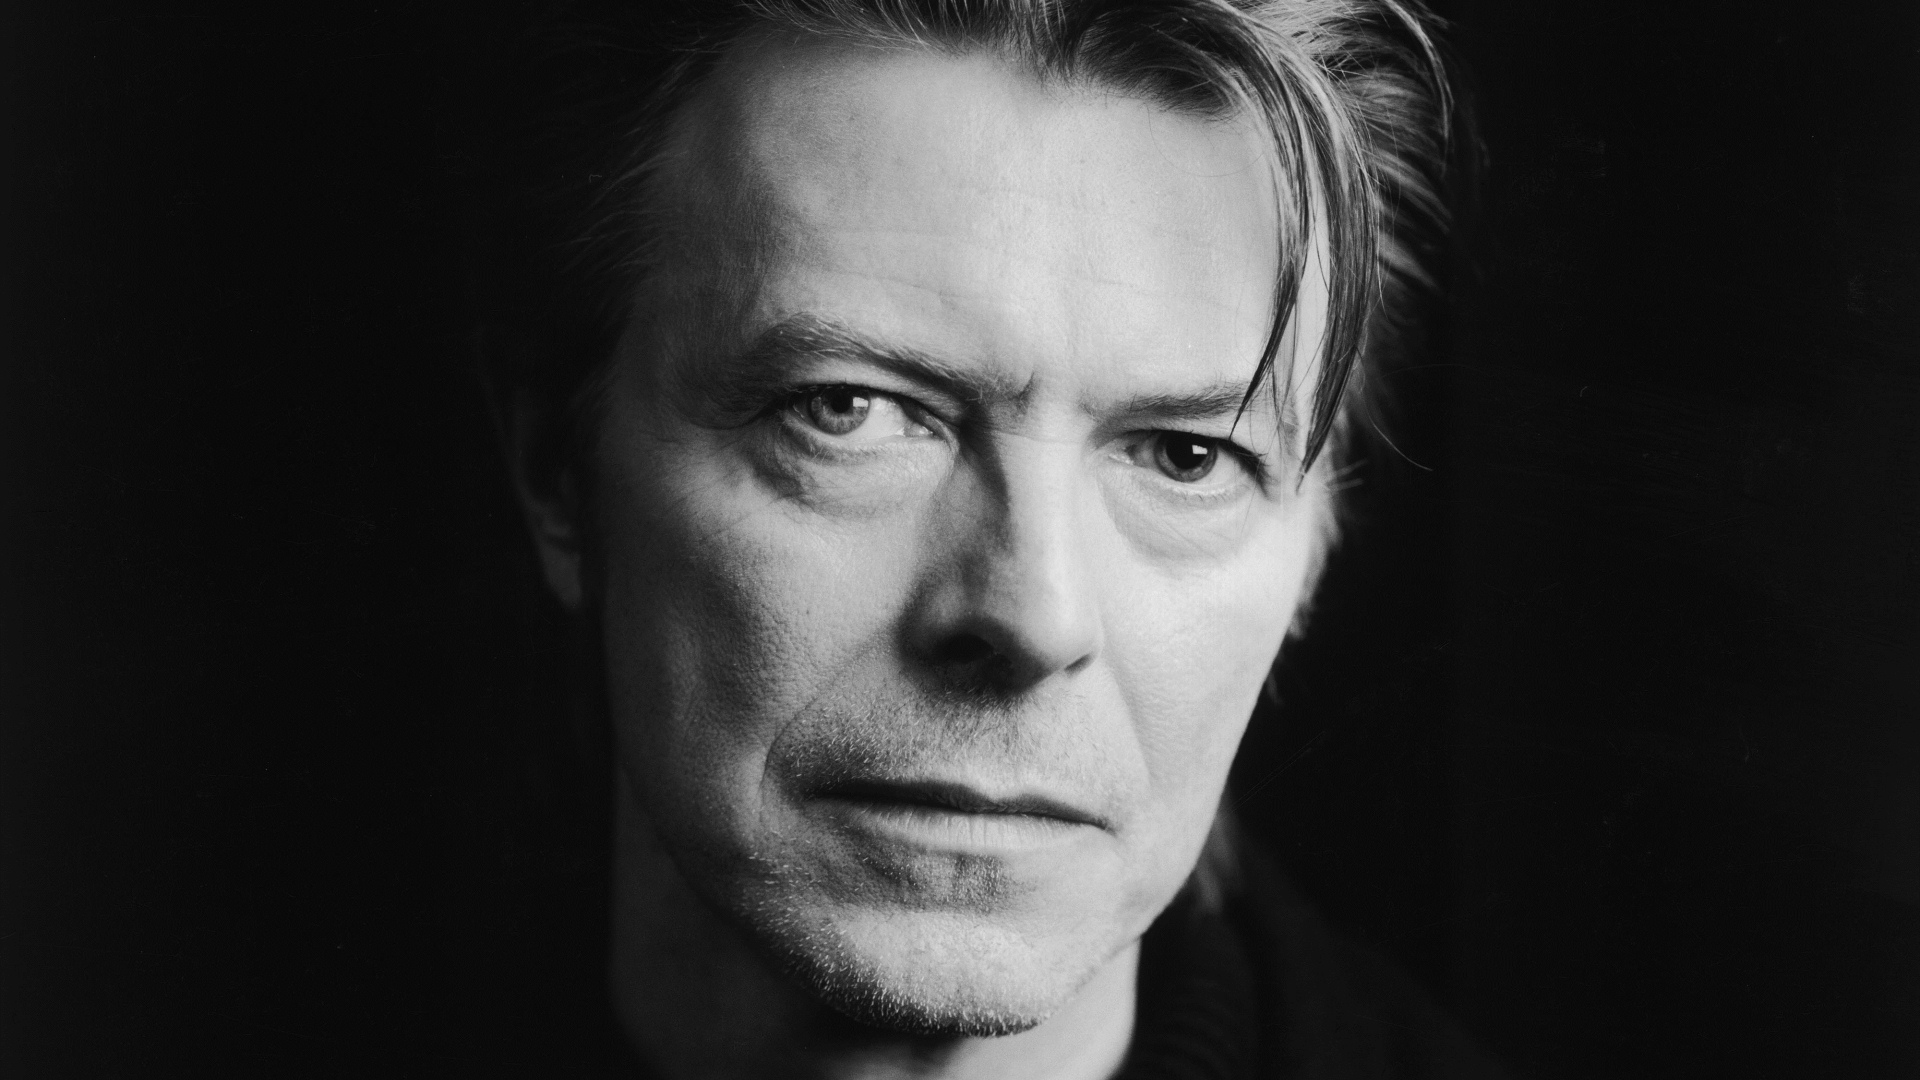 david-bowie-where-are-we-now.jpg